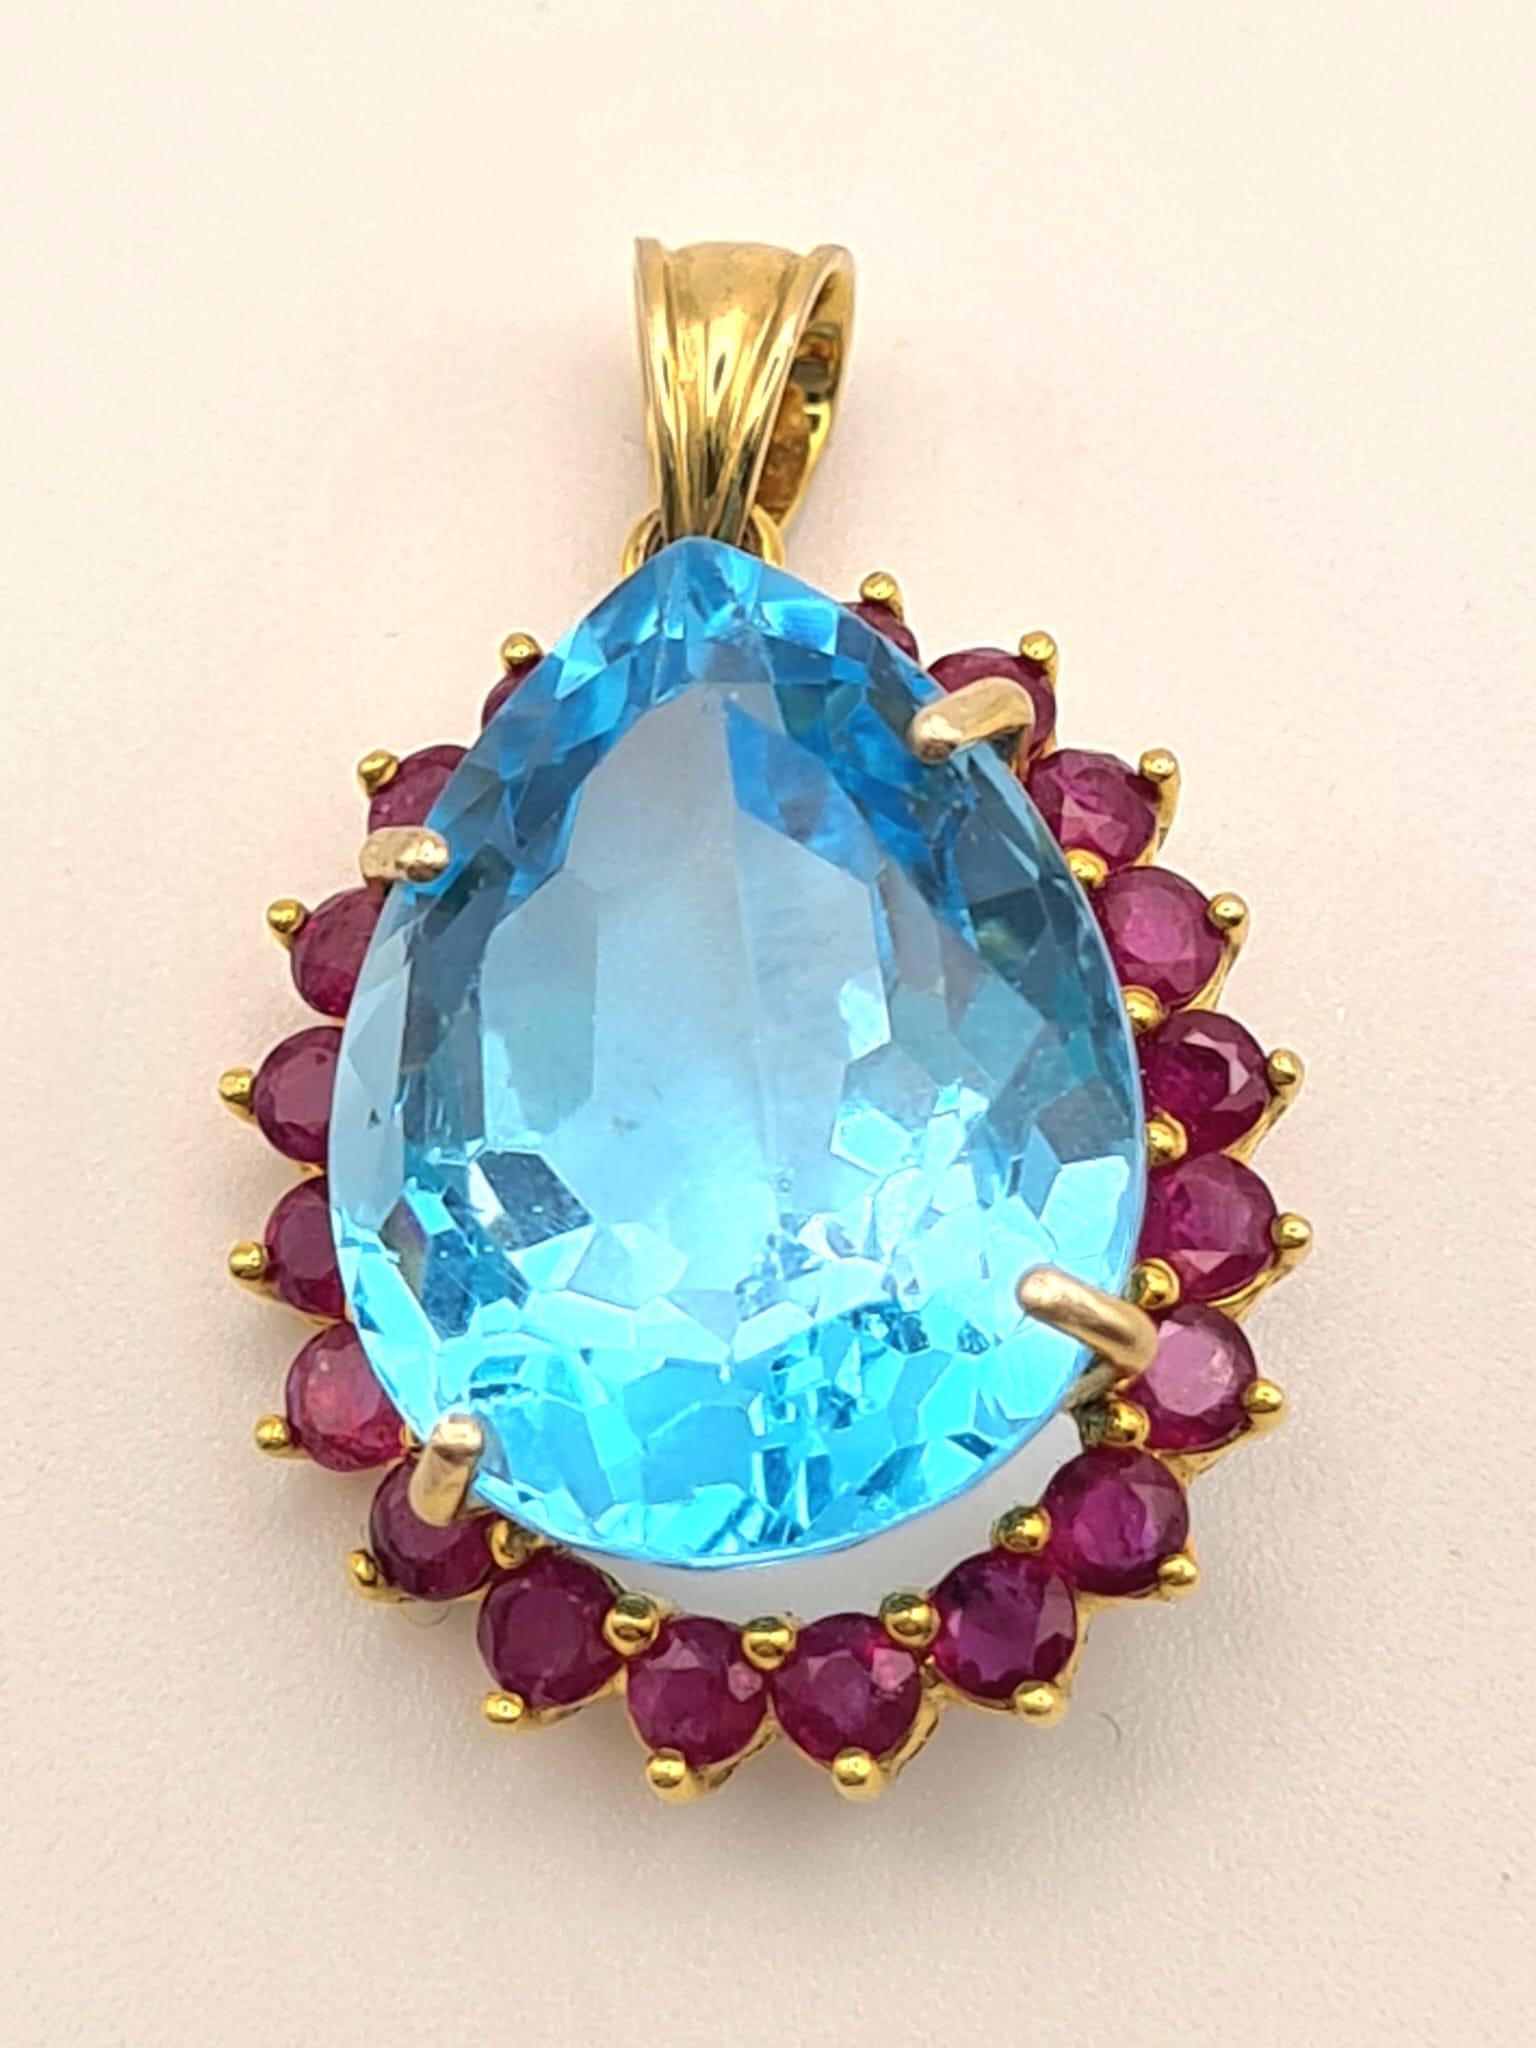 A 14K Yellow Gold Large Topaz and Ruby Pendant. 7.93g total weight. Large bright topaz surrounded by